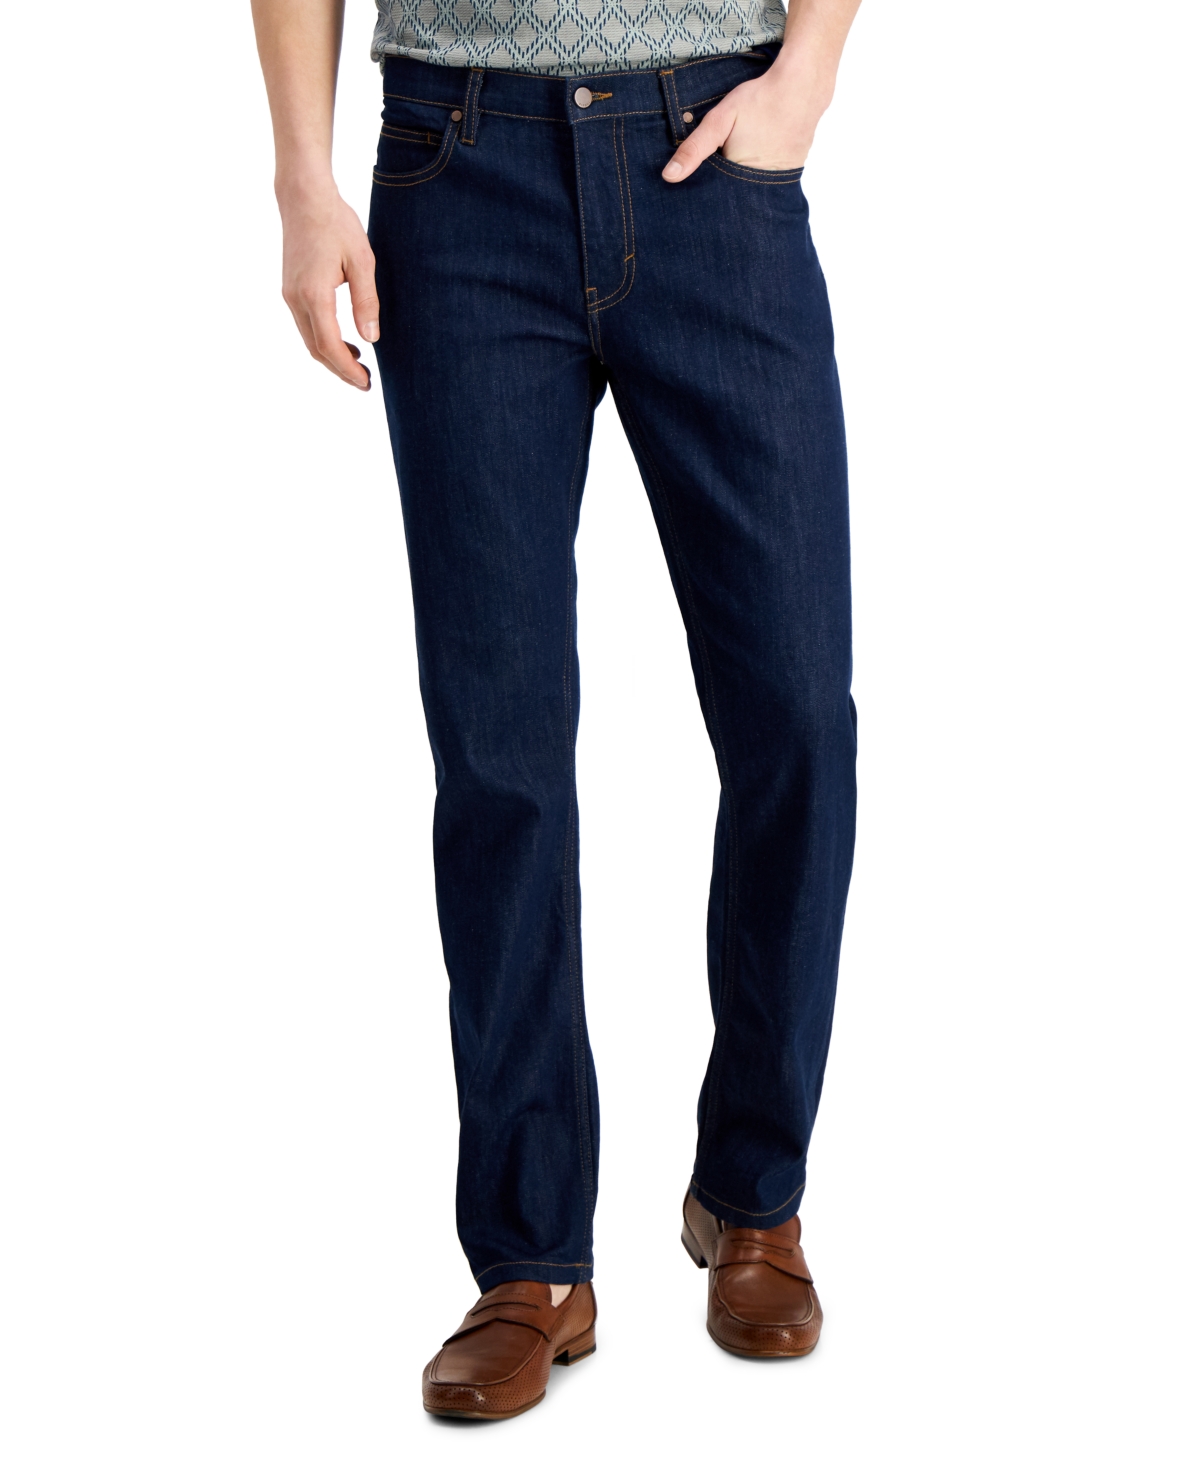 Men's Jeans: Alfani David-Rinse Straight Fit Stretch Jeans $23.93, Levi's 501 Original Fit Stretch Jeans $23.83 & More + Free Store Pickup at Macy's or F/S on $25+